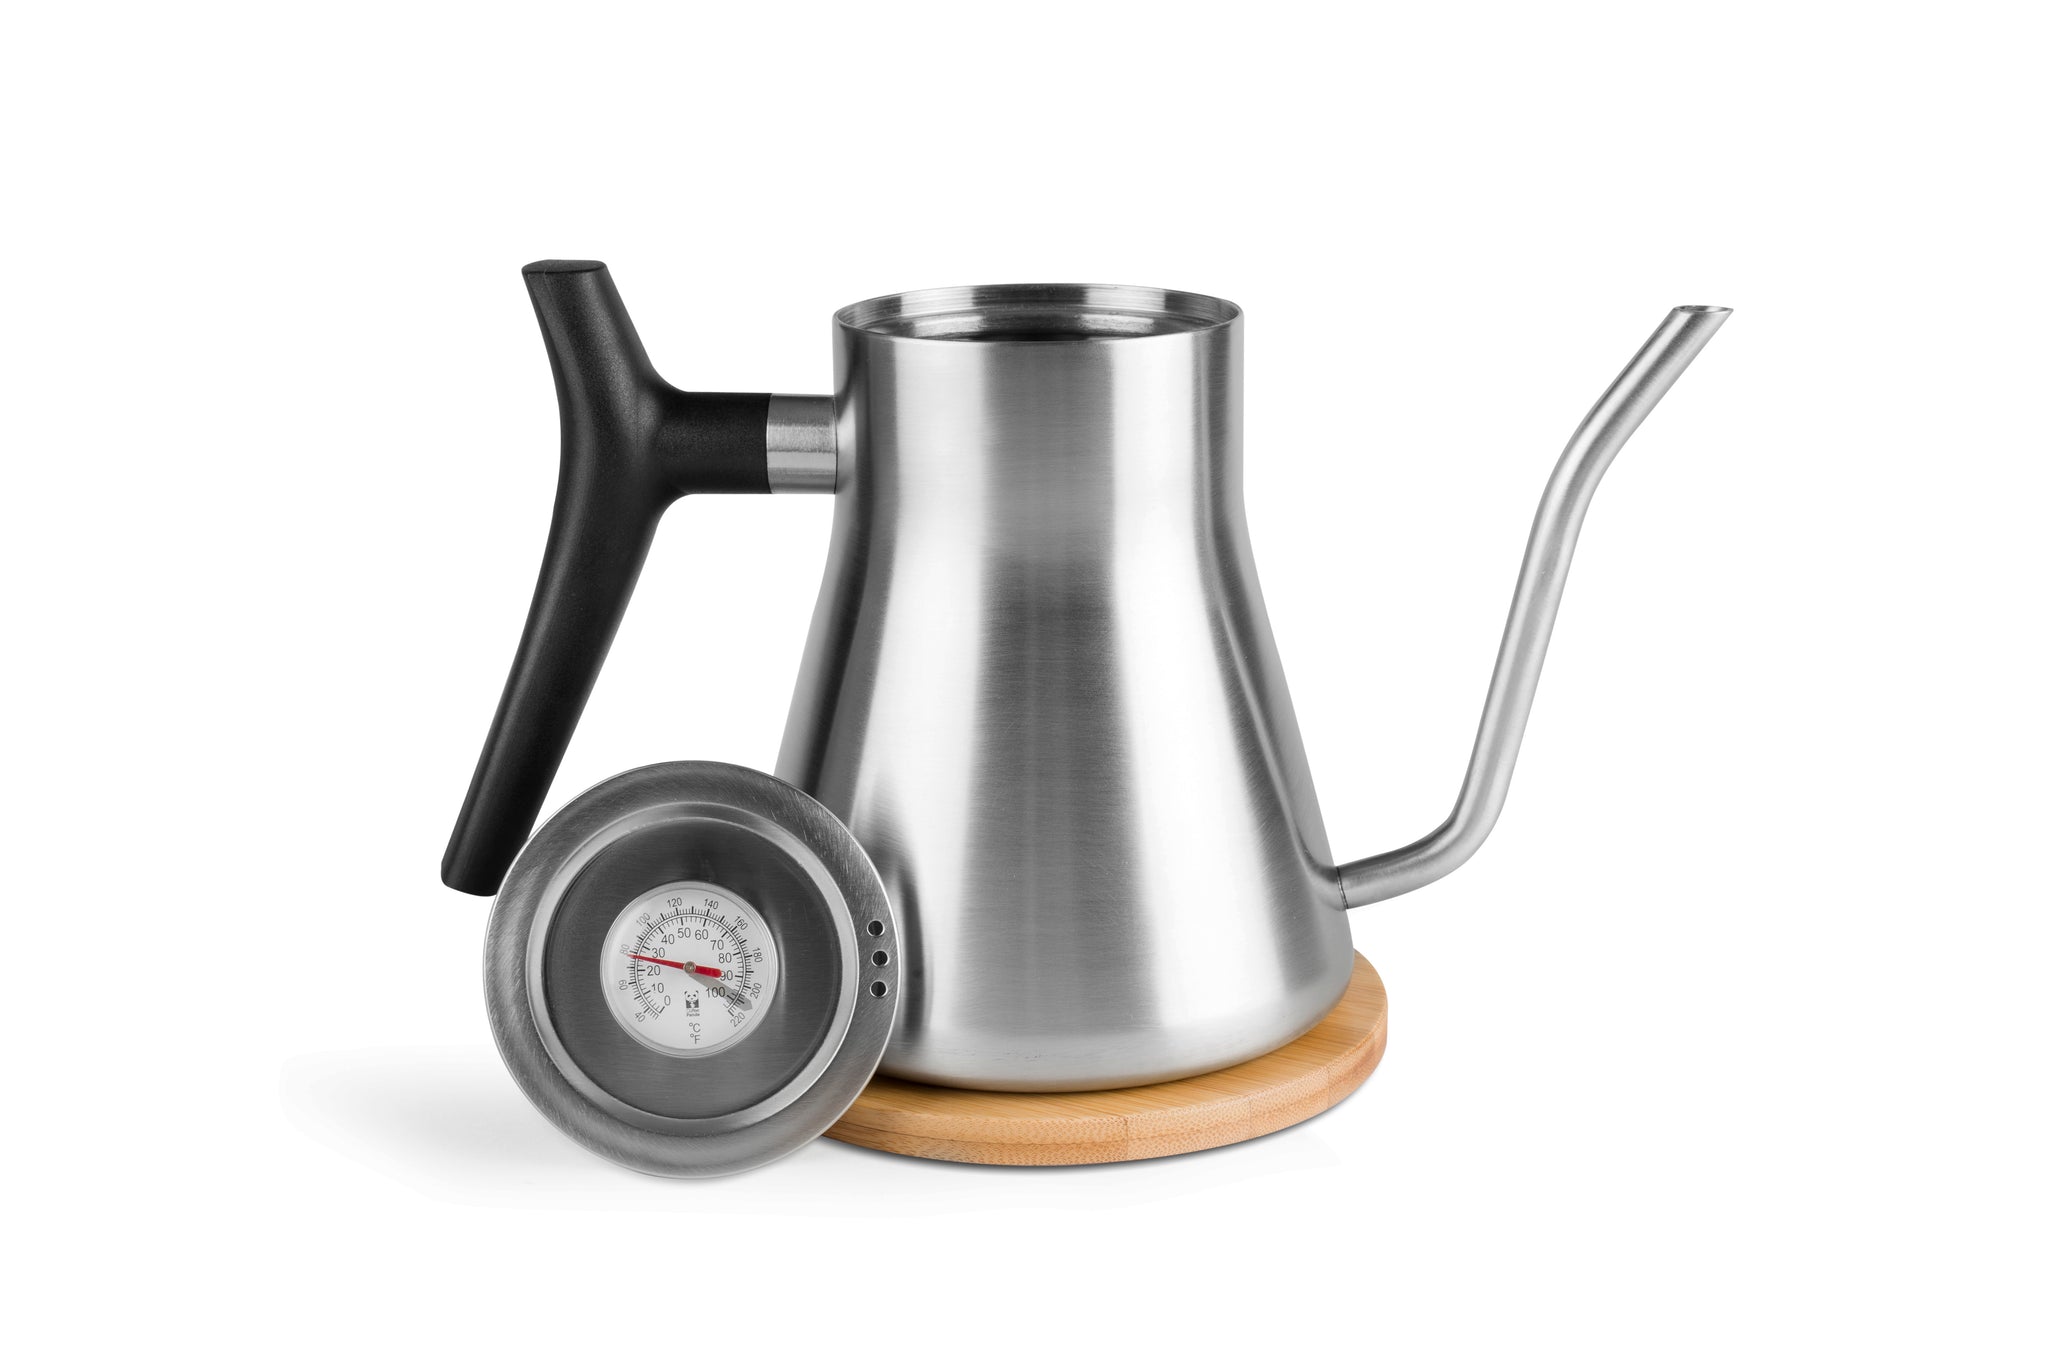 1L/1.2L Pour Over Coffee Kettle Stainless Steel Gooseneck Coffee